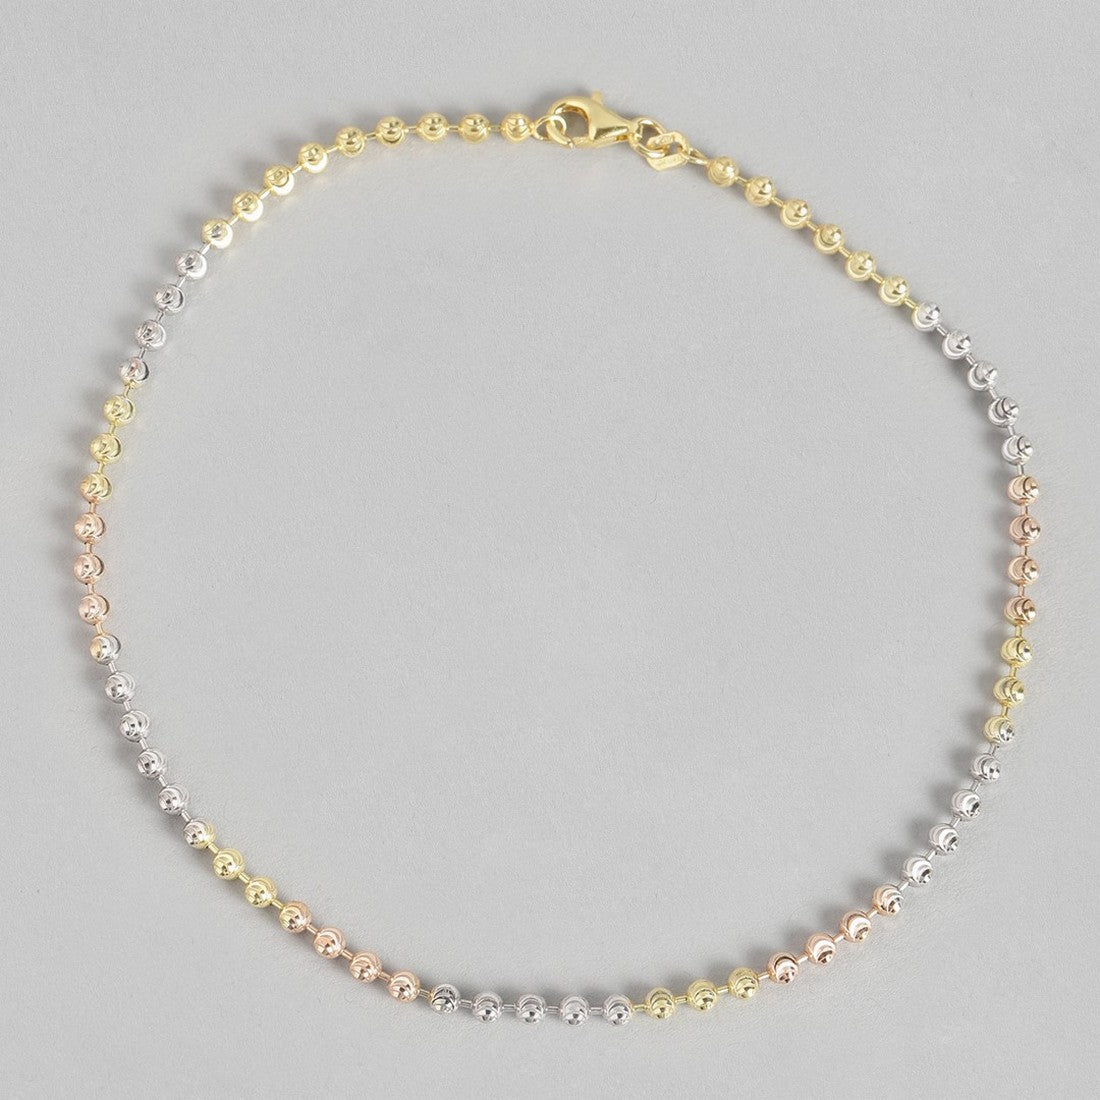 Dual Tone Beaded 925 Sterling Silver Anklet